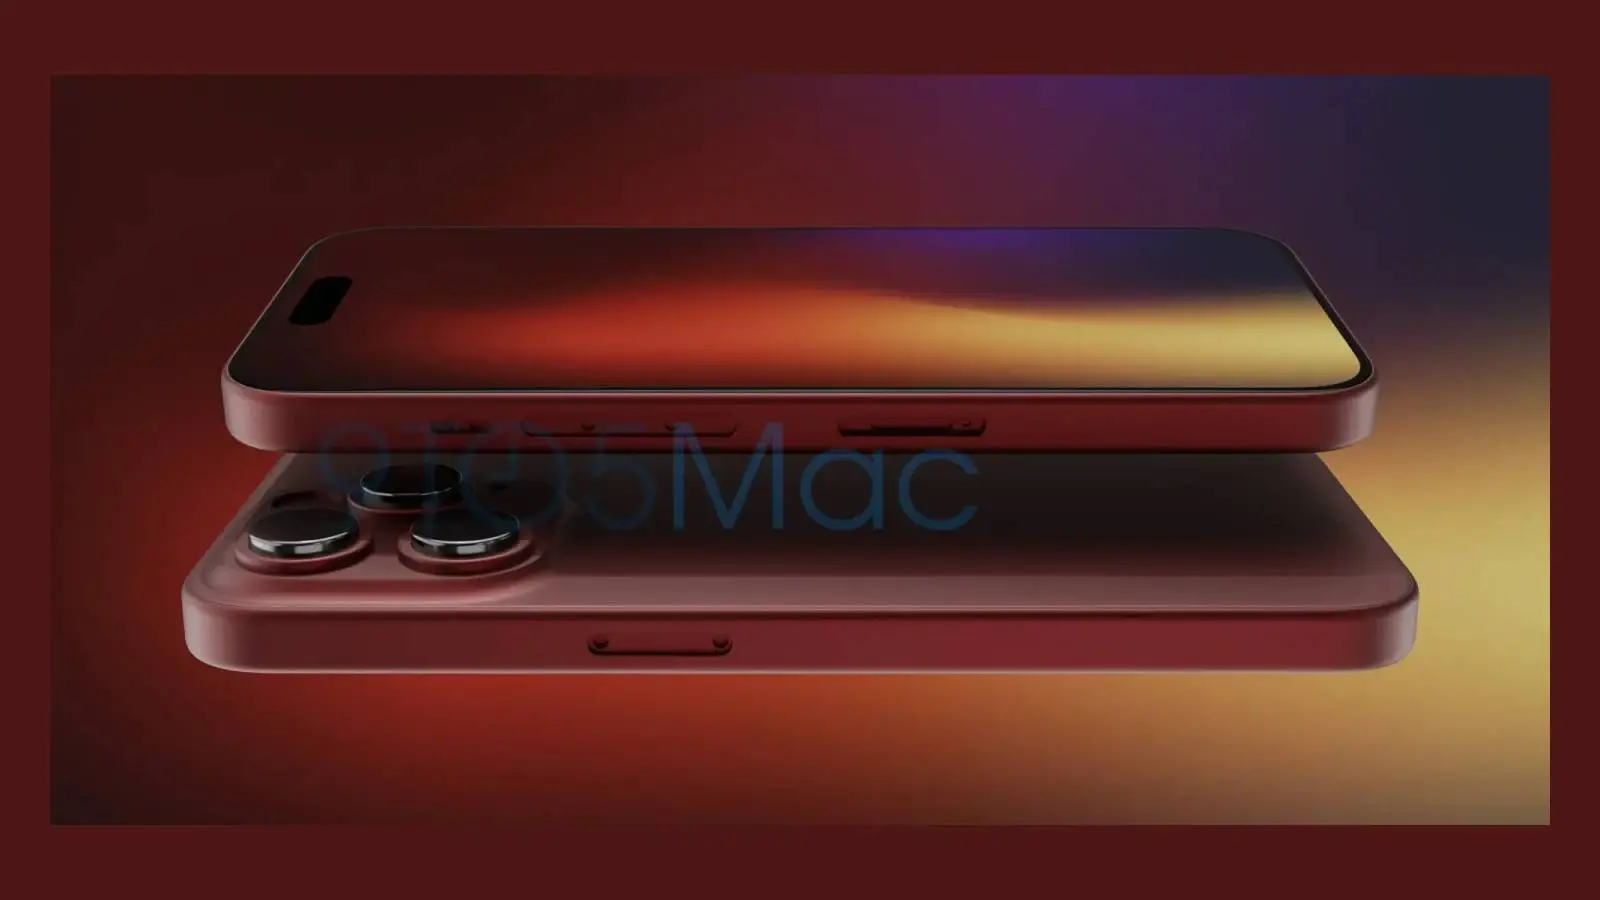 Render of the iPhone 15 Pro in the rumored red color. (Image Source - 9to5Mac) - iPhone 15 colors: what to expect